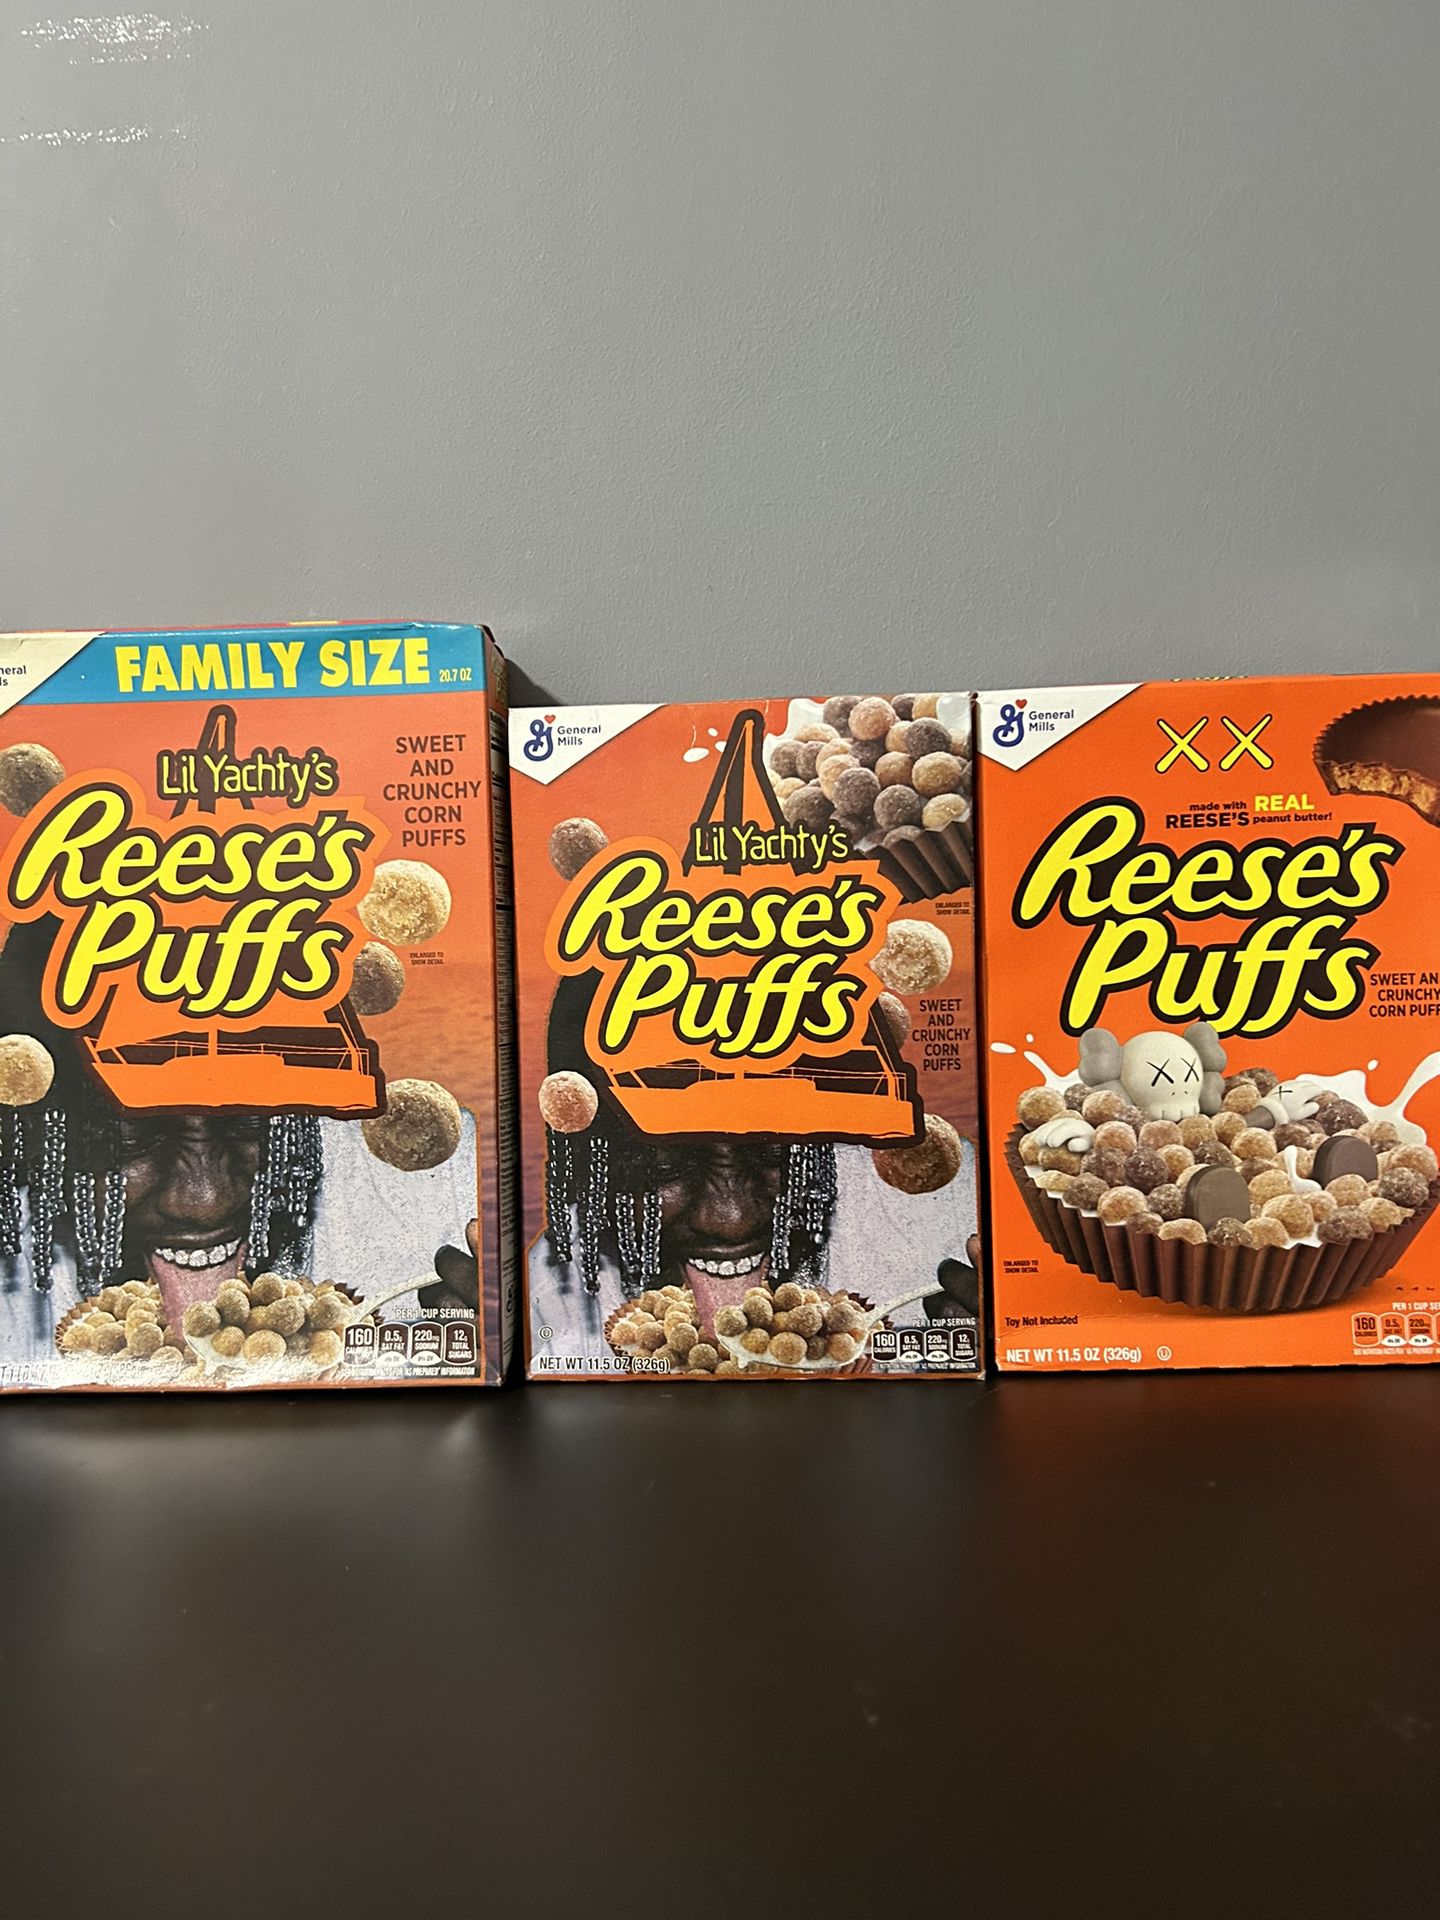 Reese’s Puffs collabs